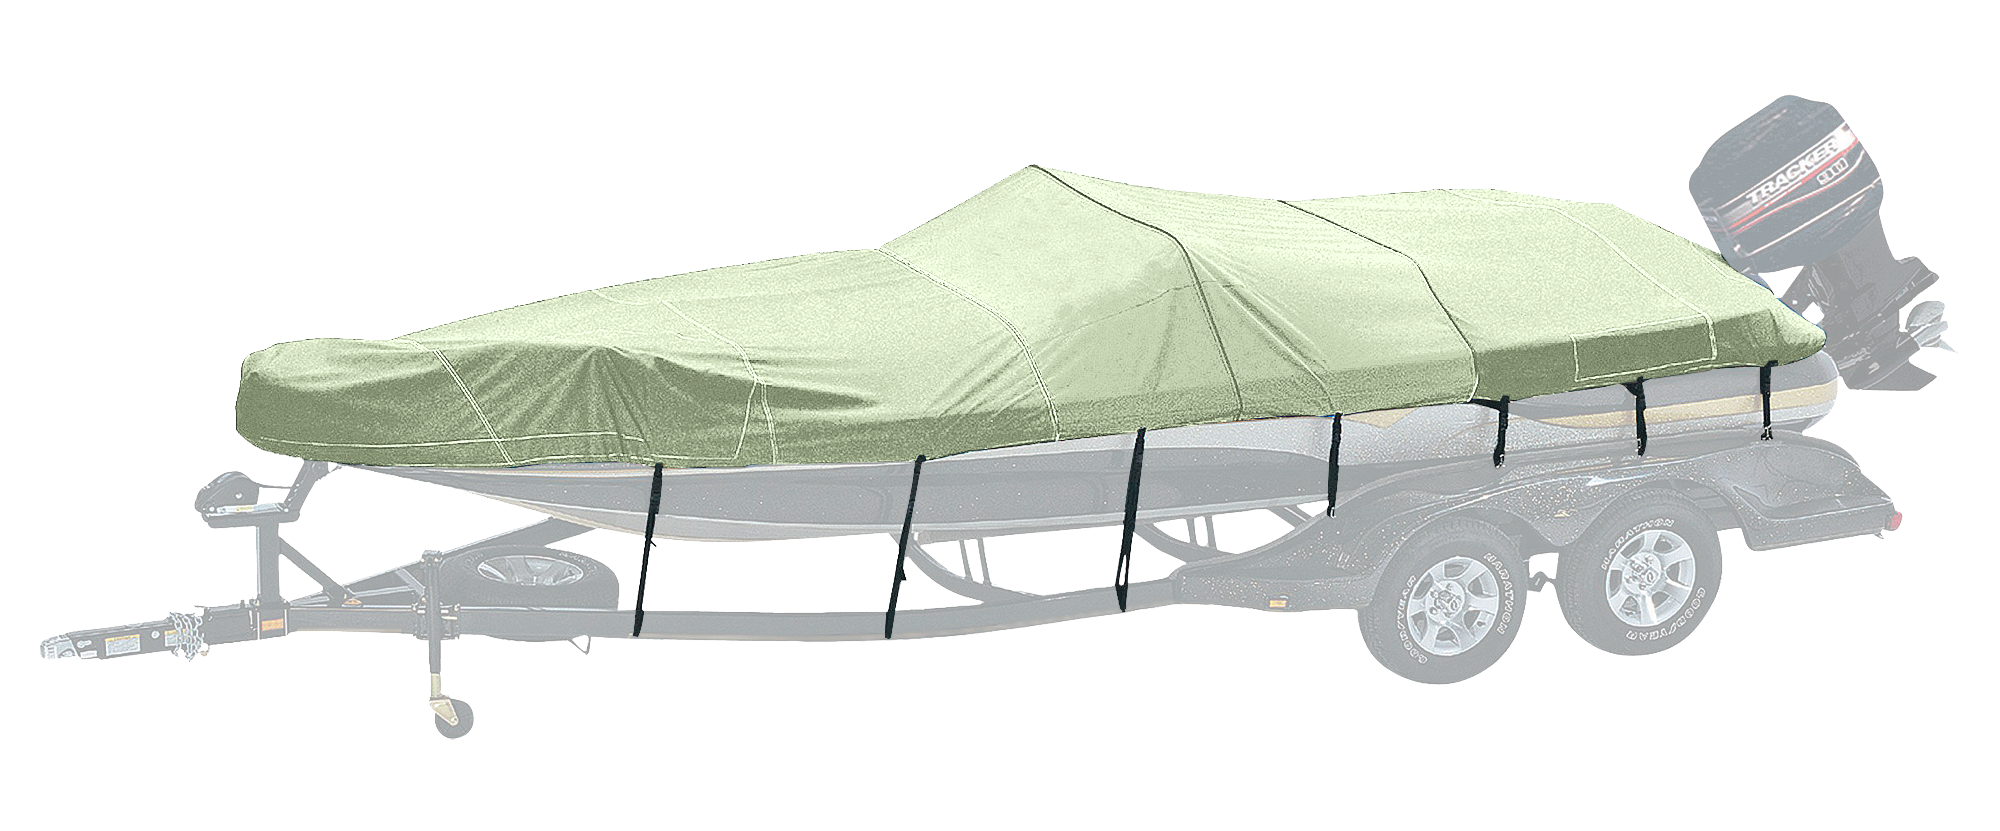 Bass Pro Shops Exact Fit Boat Cover by Westland - Tahoe Boats - 2005 228 Deckboat I/O - Linen